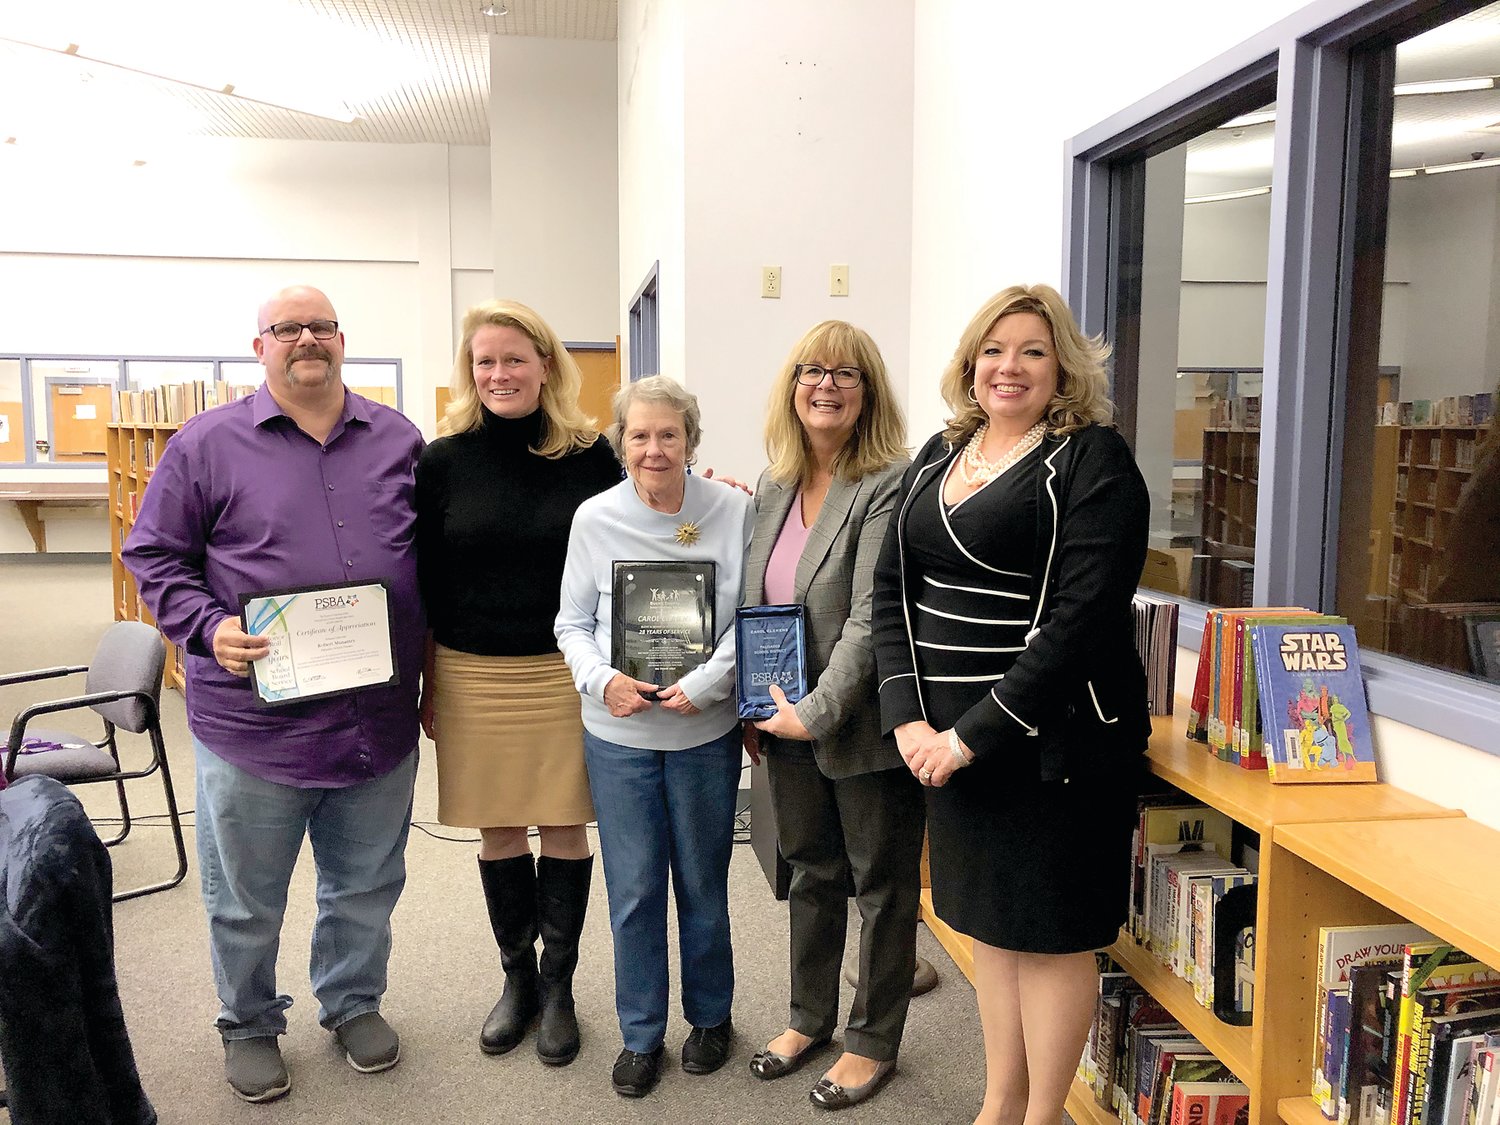 Palisades School Board President Bob Musantry, Dr. Bridget O’Connell; Karen Devine, and Rebecca Roberts-Malamis were among presenters honoring Carol Clemens, center, at the Nov. 6 public board meeting for her 32 years of service on the school board and 28 years for the Bucks County Intermediate Unit.